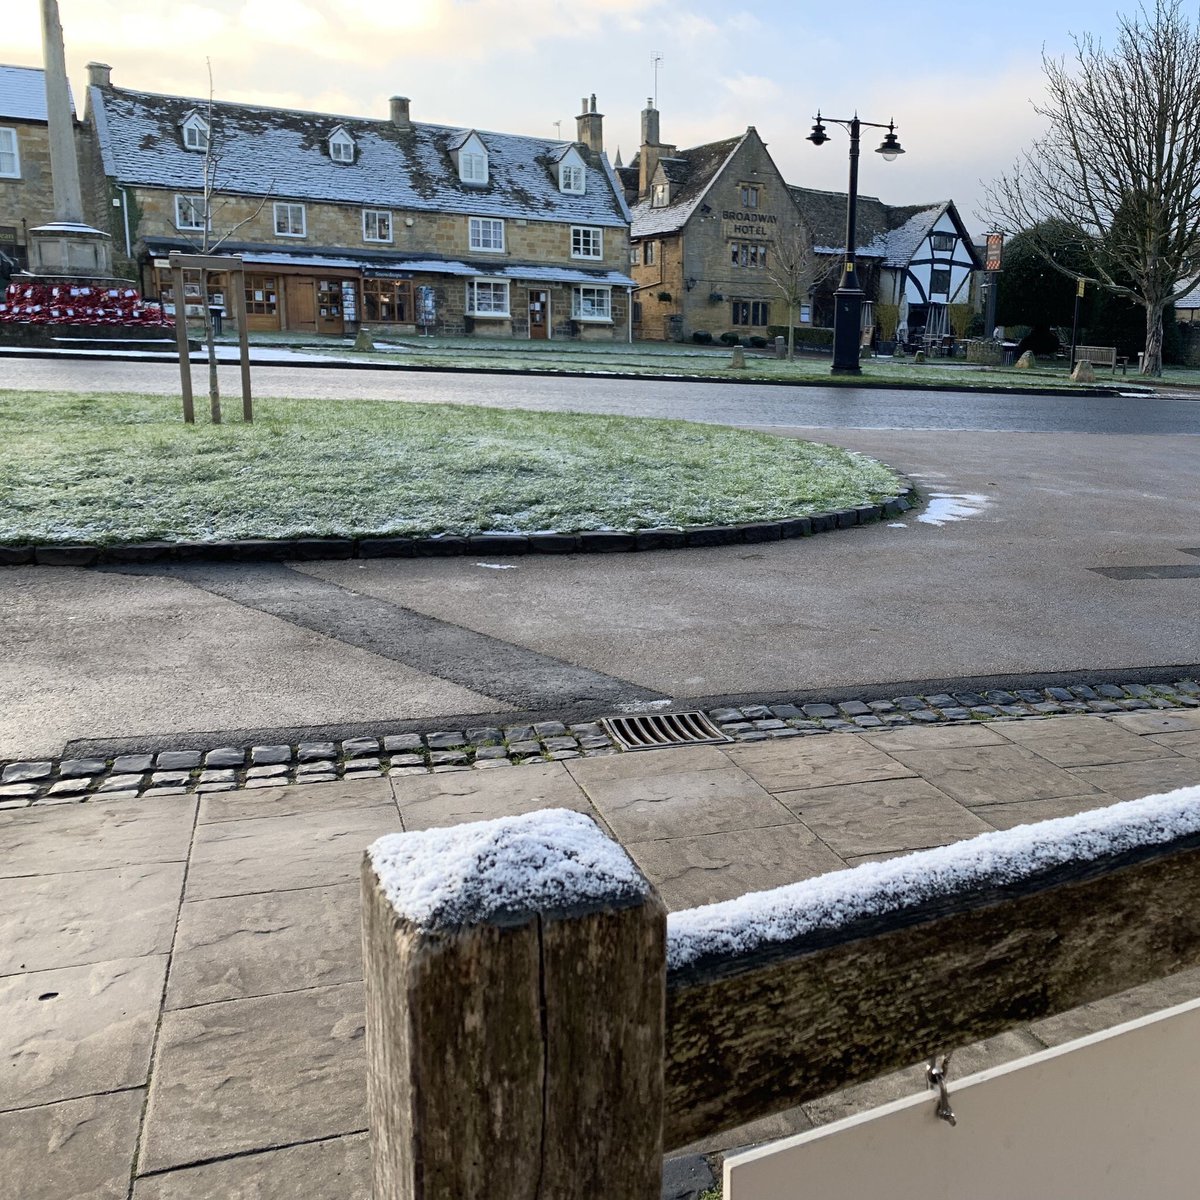 Crisp Morning Frost in Broadway ❄️
•
📷 Photo by @broadwaycotswolds 
• 
📍 #Cotswolds AONB 
•
🇬🇧 #cotswold #uk #cotswoldliving  #broadway #broadwaycotswolds #frost #winter  #cotswolds #cotswolds_culture #cotswoldlife #visitgreatbritain #lovegreatbritain #lovethecotswolds